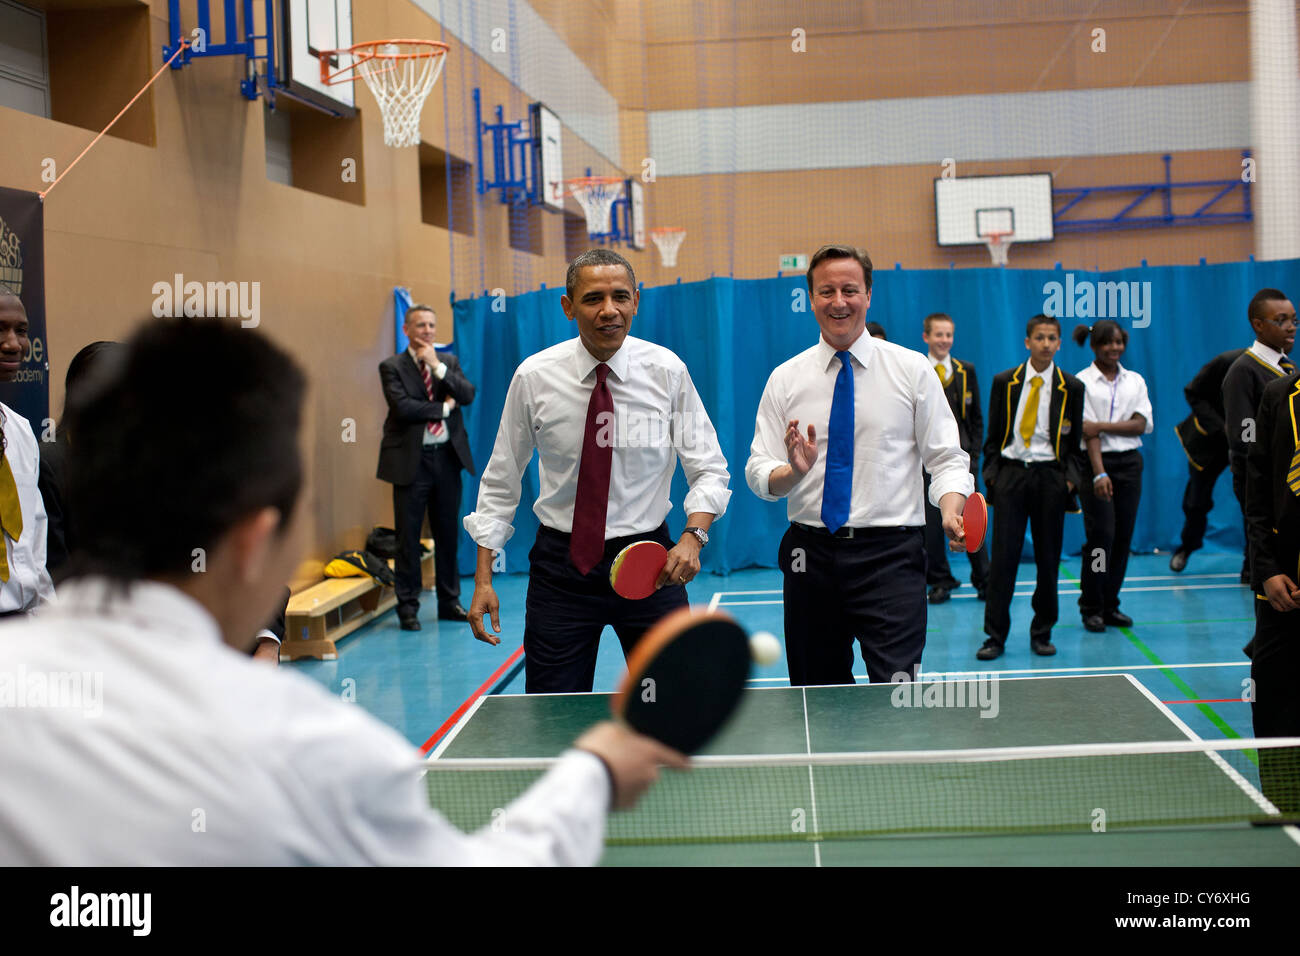 US President Barack Obama and British Prime Minister David Cameron play table tennis with students at Globe Academy May 24, 2011 in London, England. Stock Photo